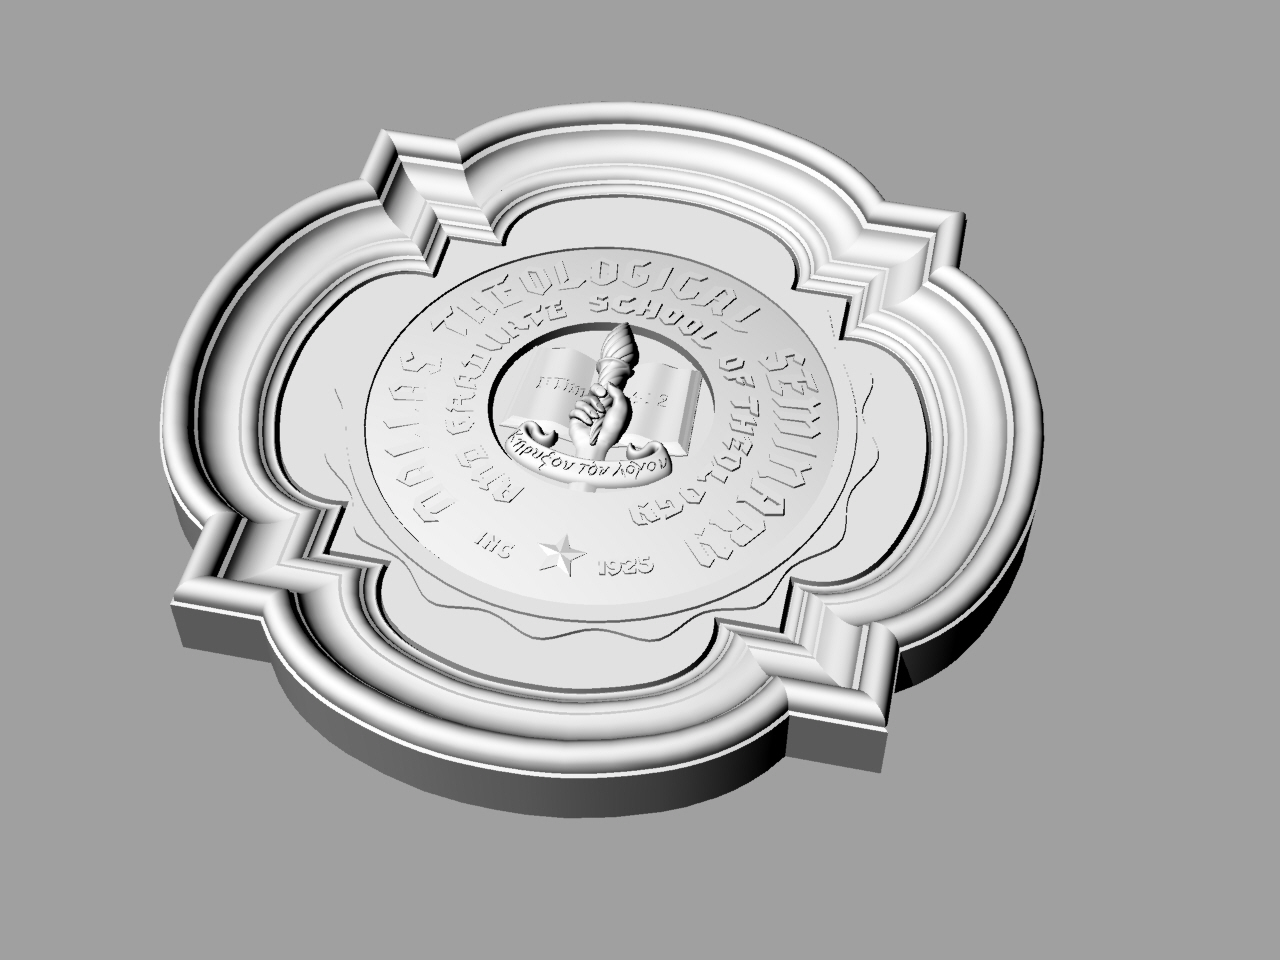 3D Model of the Medallion used as Exterior Organization Seal for the Dallas Theological Seminary and Graduate School of Theology